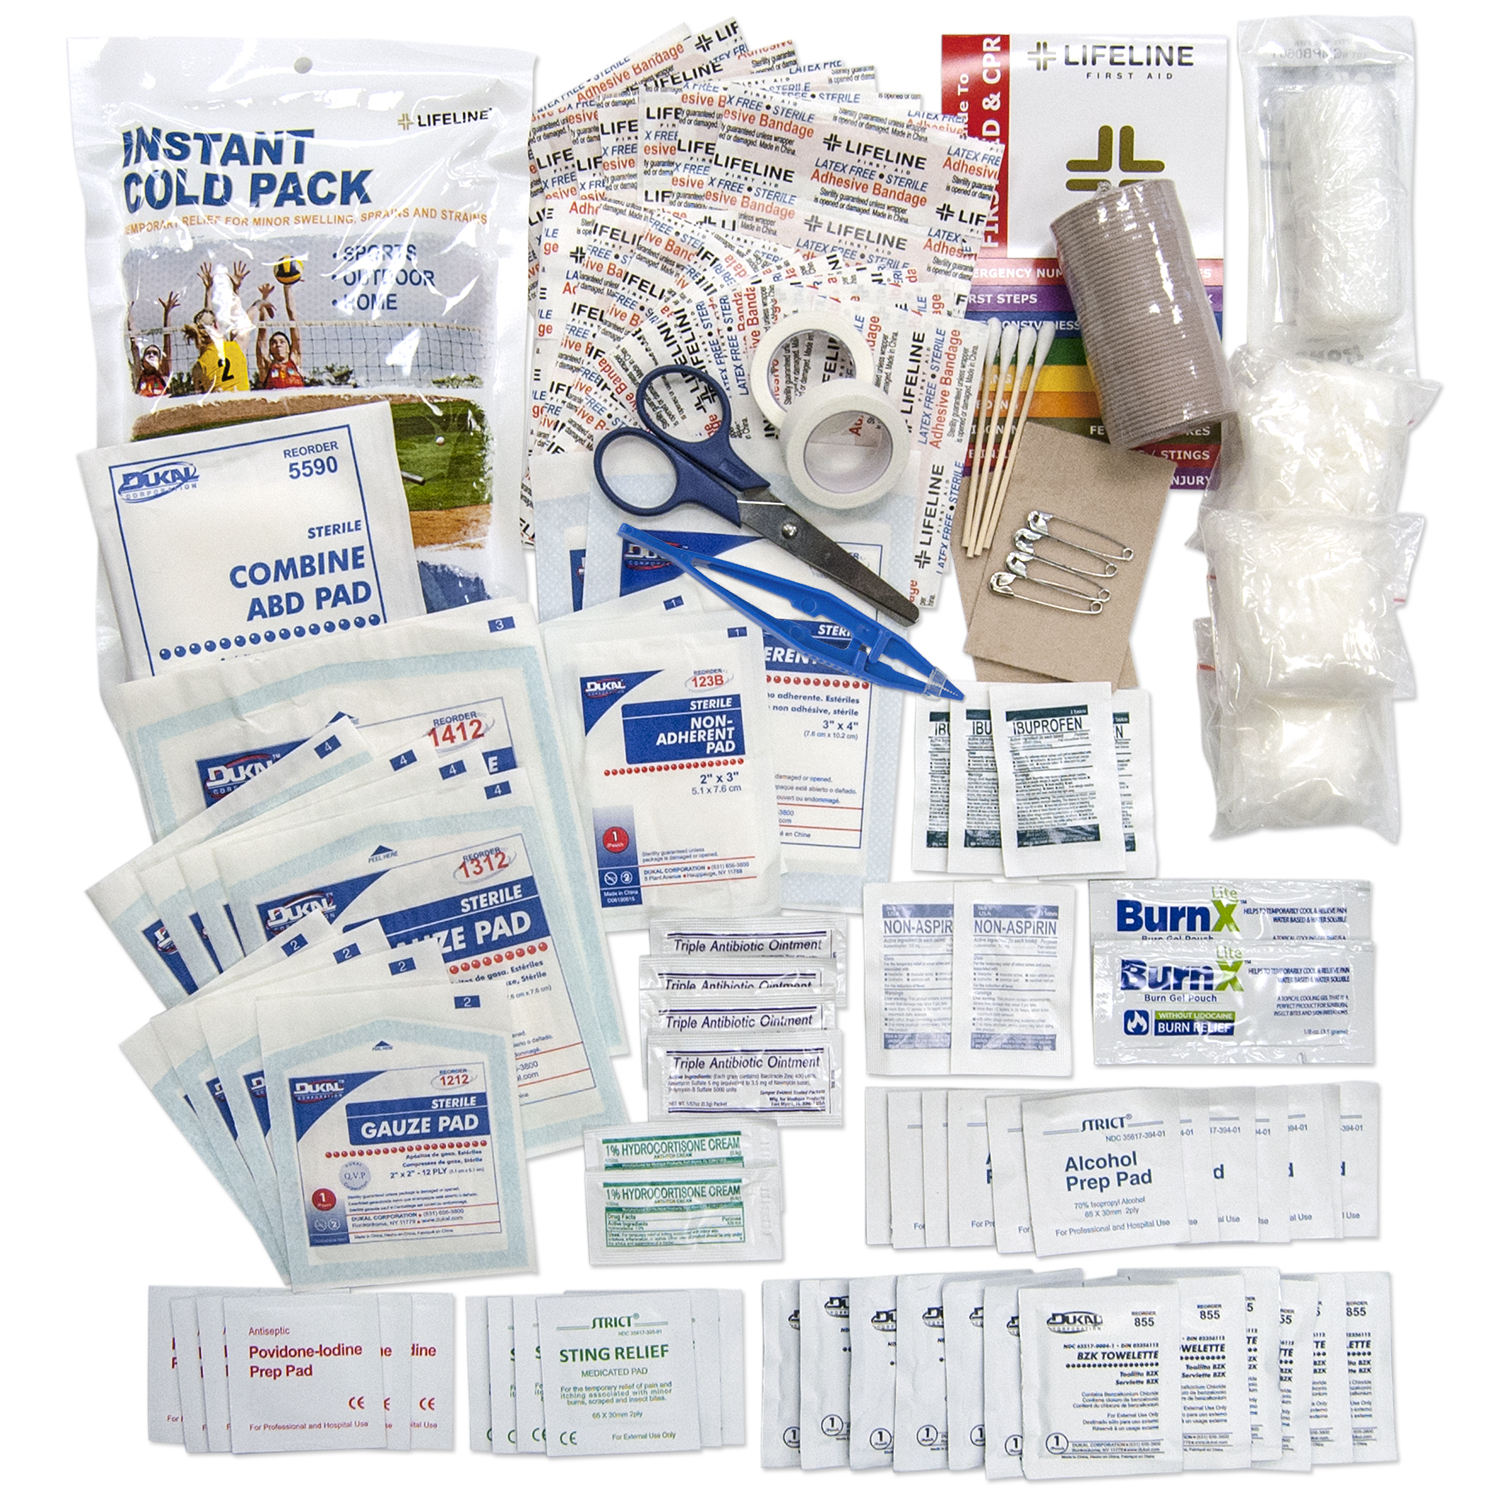 Lifeline Base Camp First Aid Kit 171 Pieces - image 1 of 3